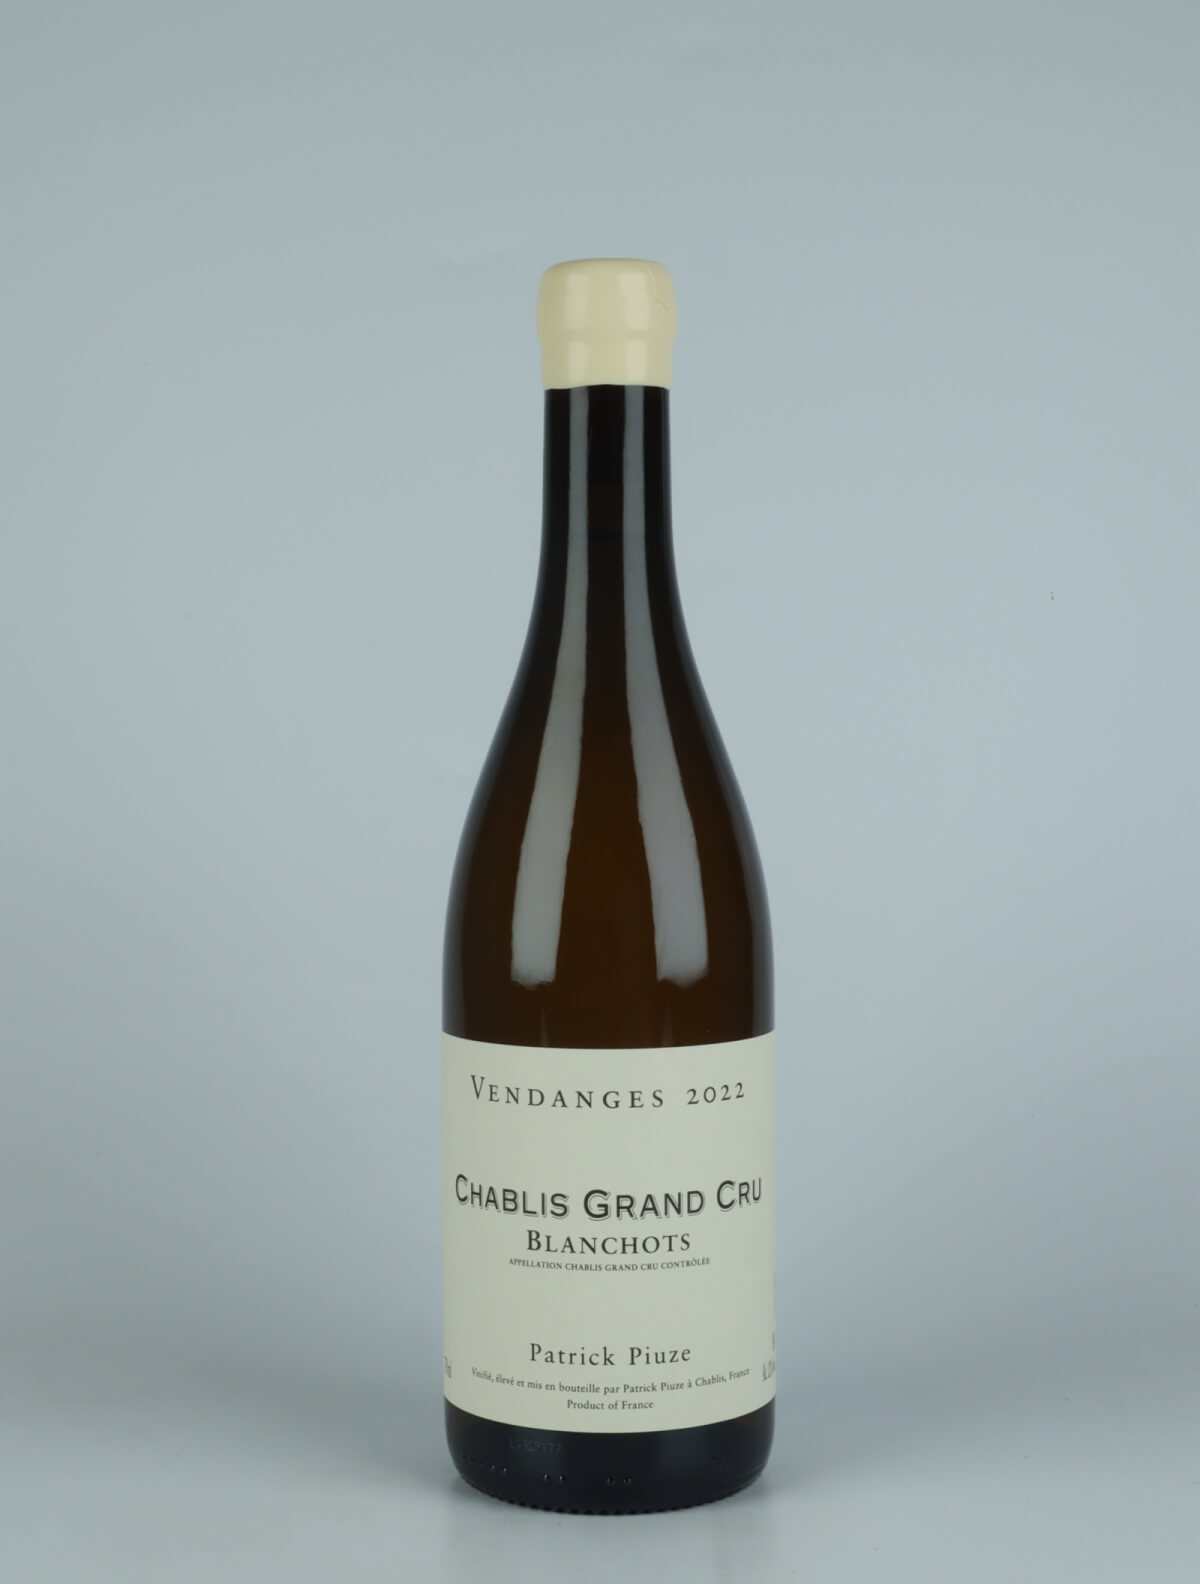 A bottle 2022 Chablis Grand Cru - Blanchots White wine from Patrick Piuze, Burgundy in France